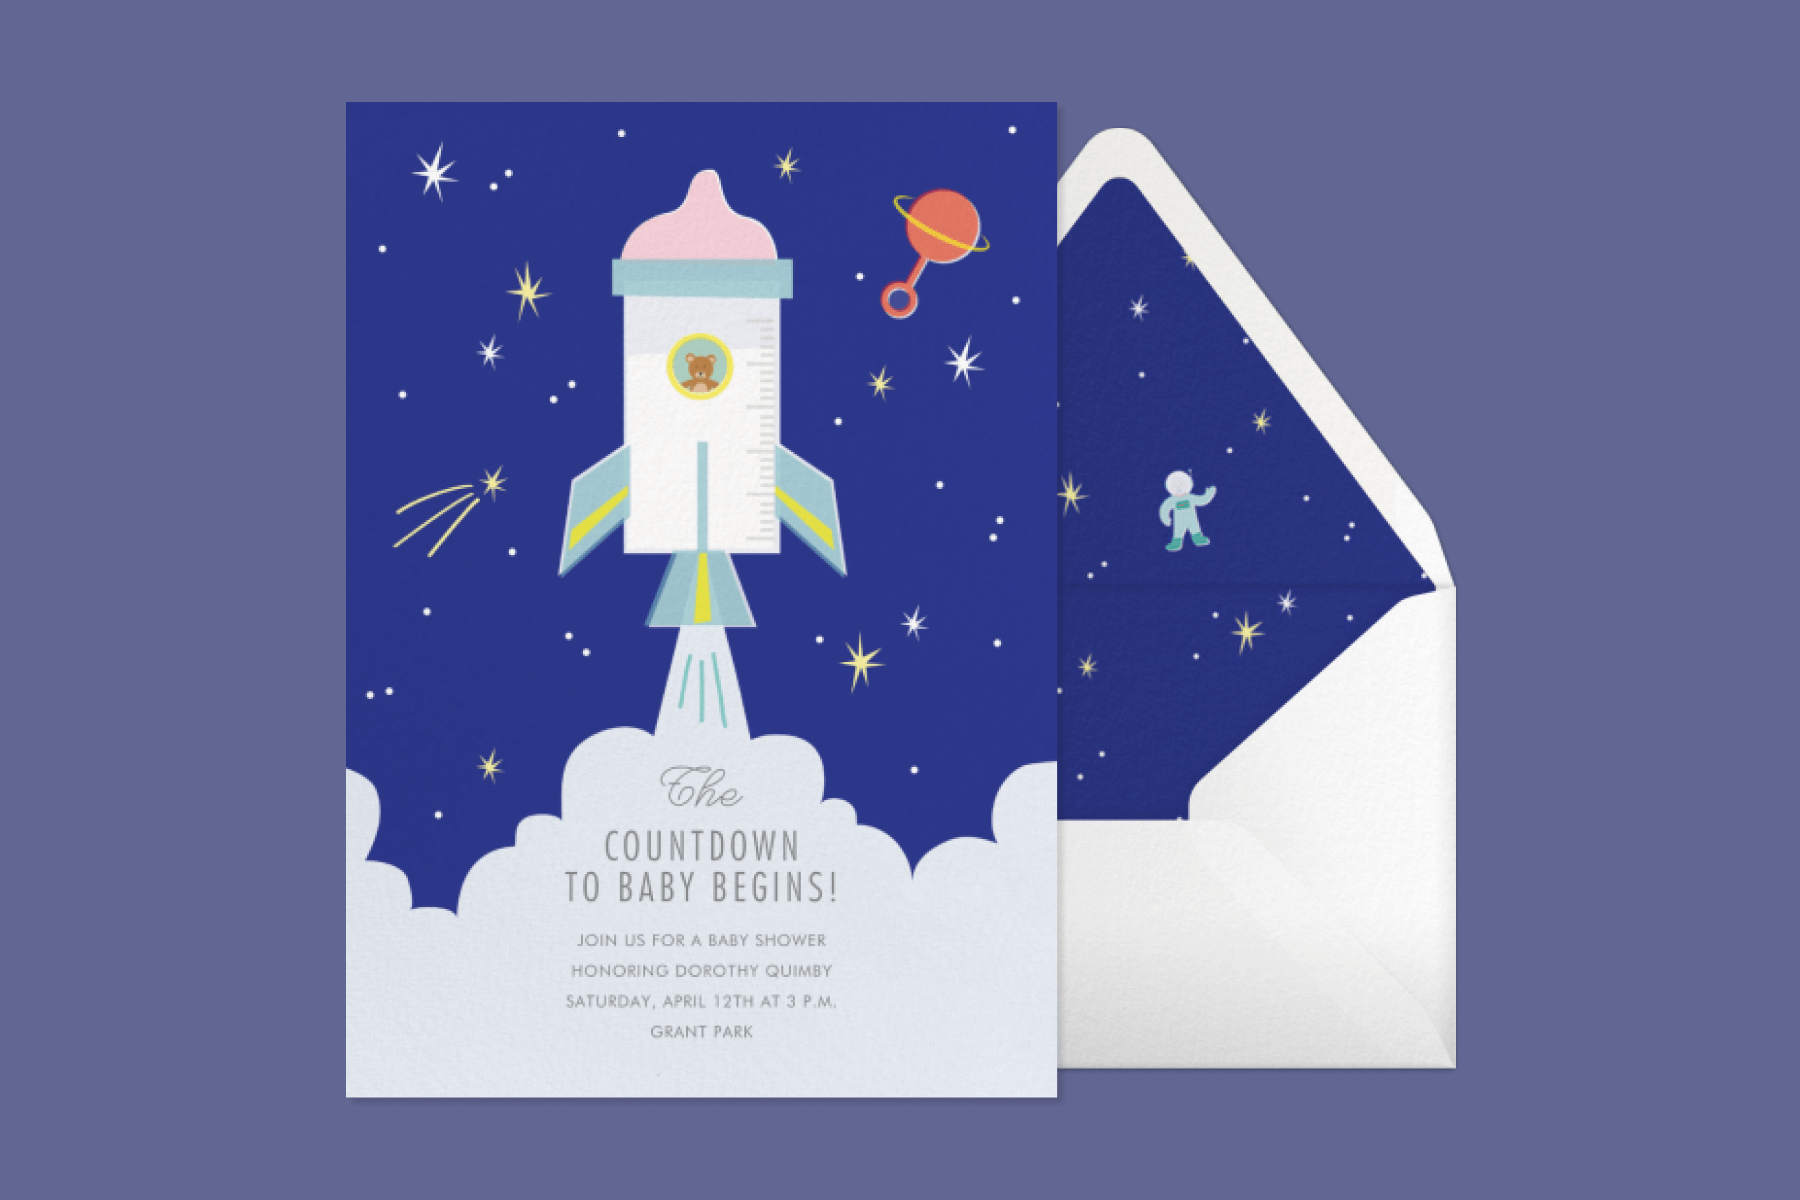 A baby shower invitation featuring an illustration of a rocket ship shaped like a baby bottle.